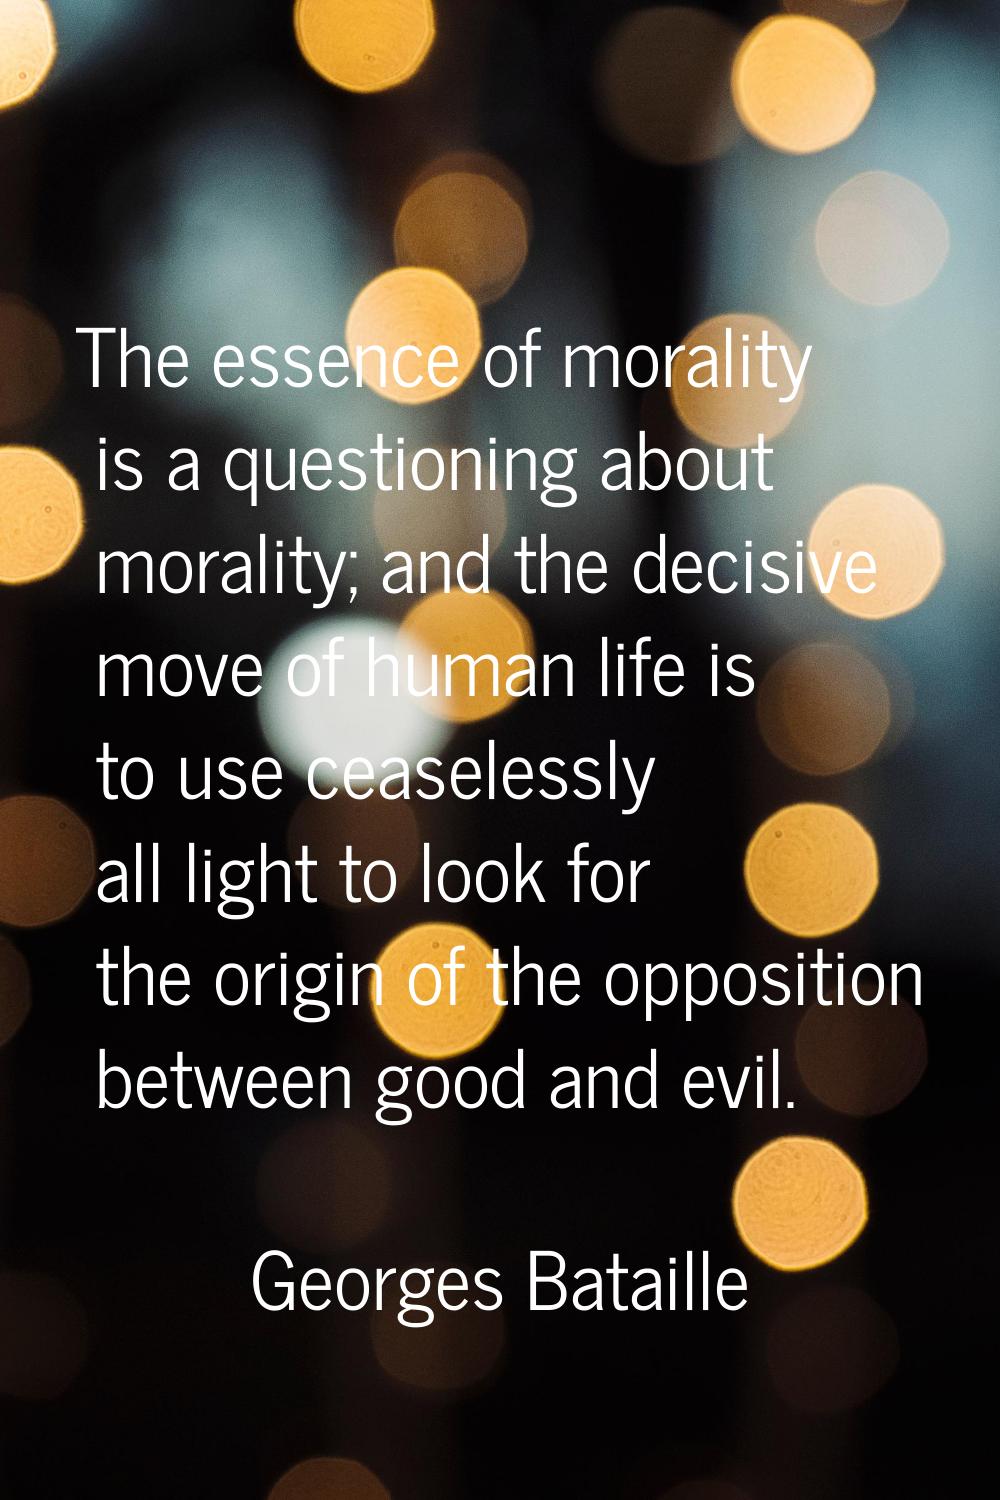 The essence of morality is a questioning about morality; and the decisive move of human life is to 